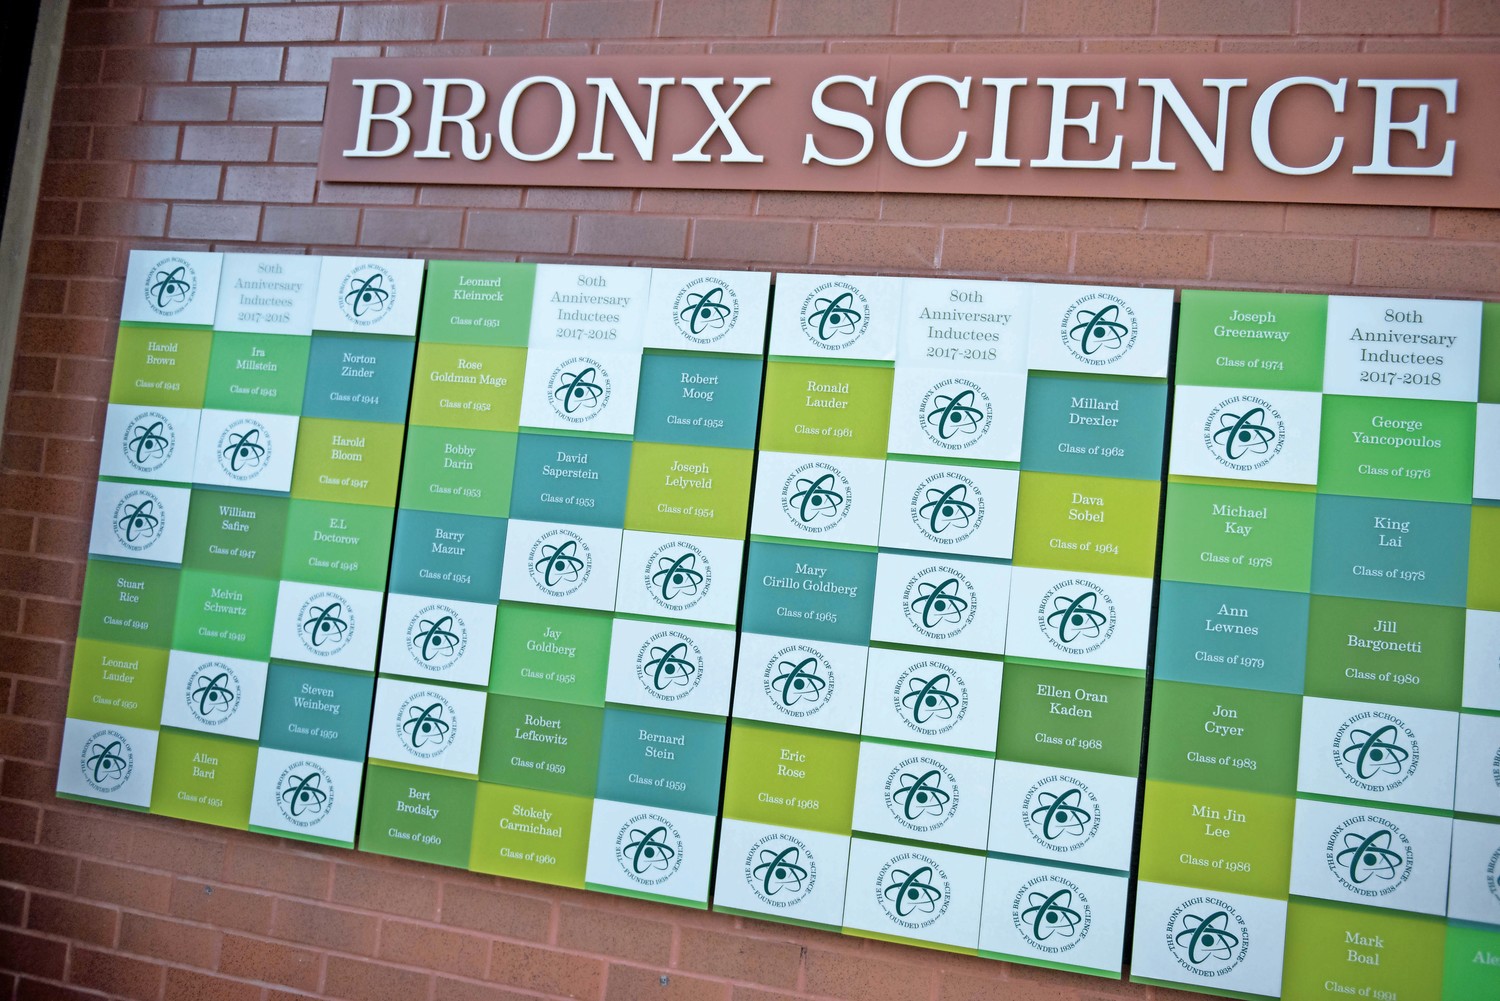 The hall of fame at Bronx Science displays the names and graduation years of notable alumni. Each alum has to come by the school to unveil his or her name.